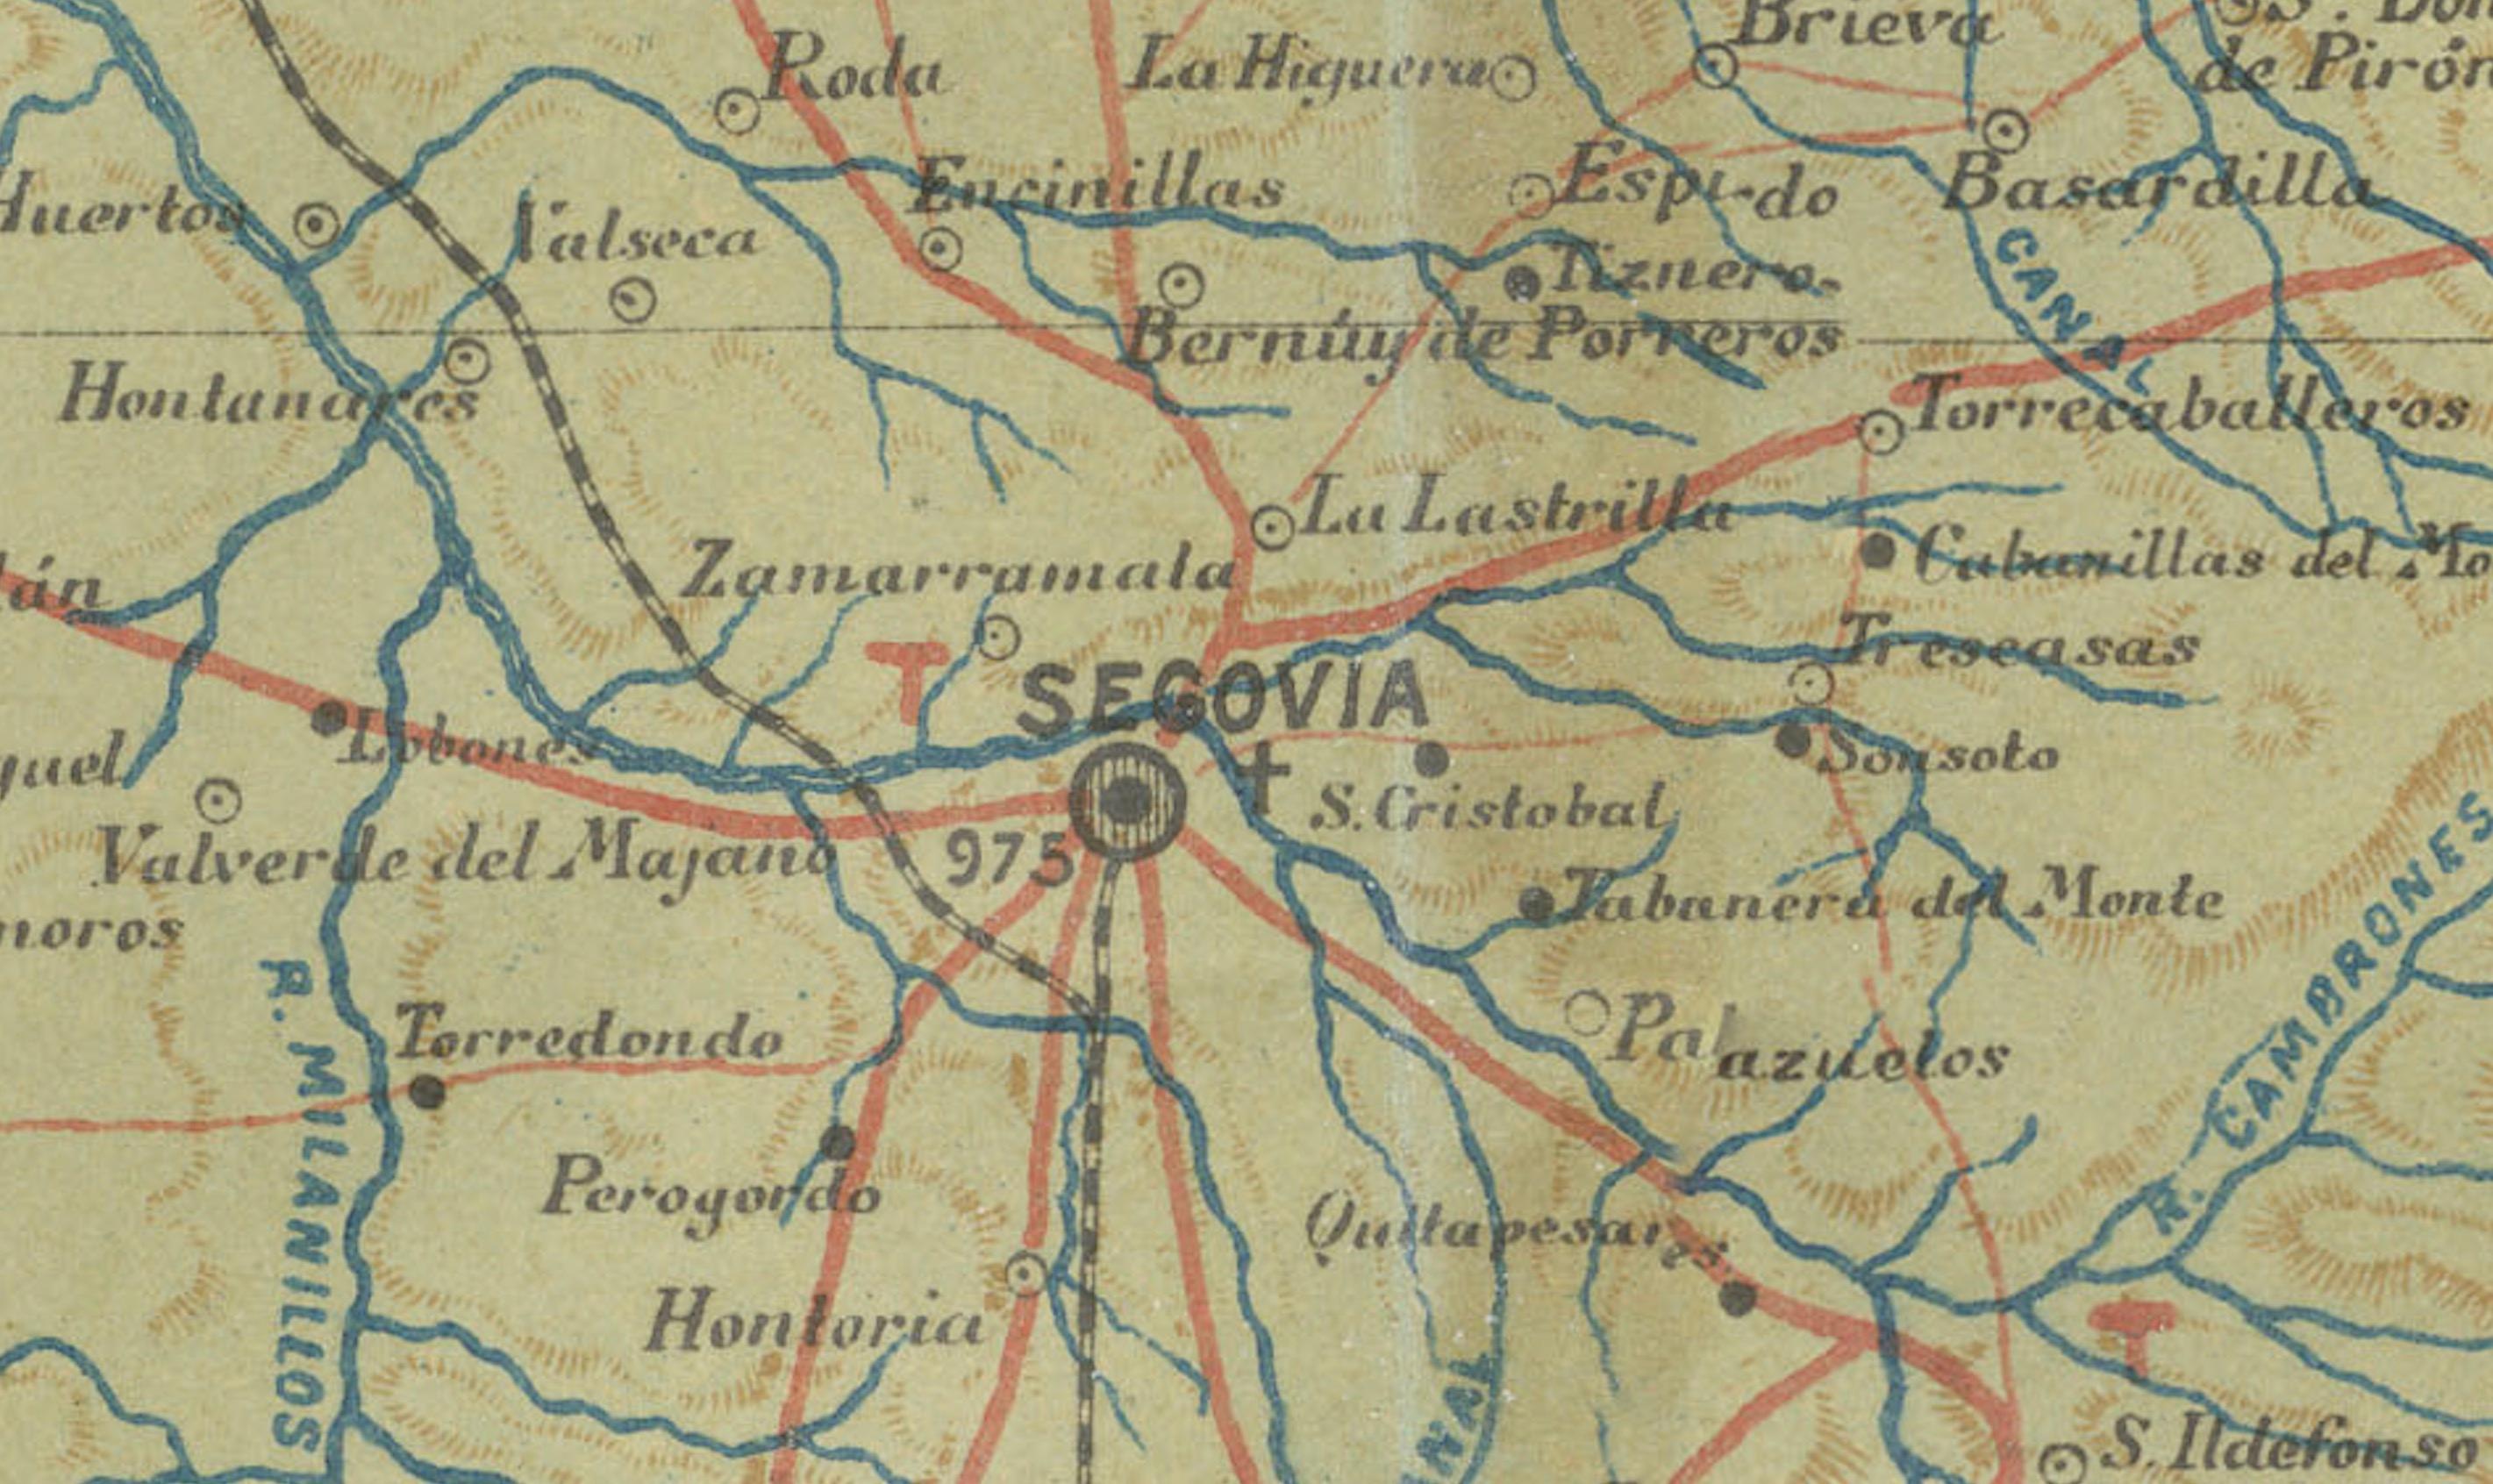 An original old map of the province of Segovia from the year 1902. Segovia is a historic area located in the central part of Spain, northwest of Madrid. Known for its rich history, architectural landmarks, and strategic importance throughout the